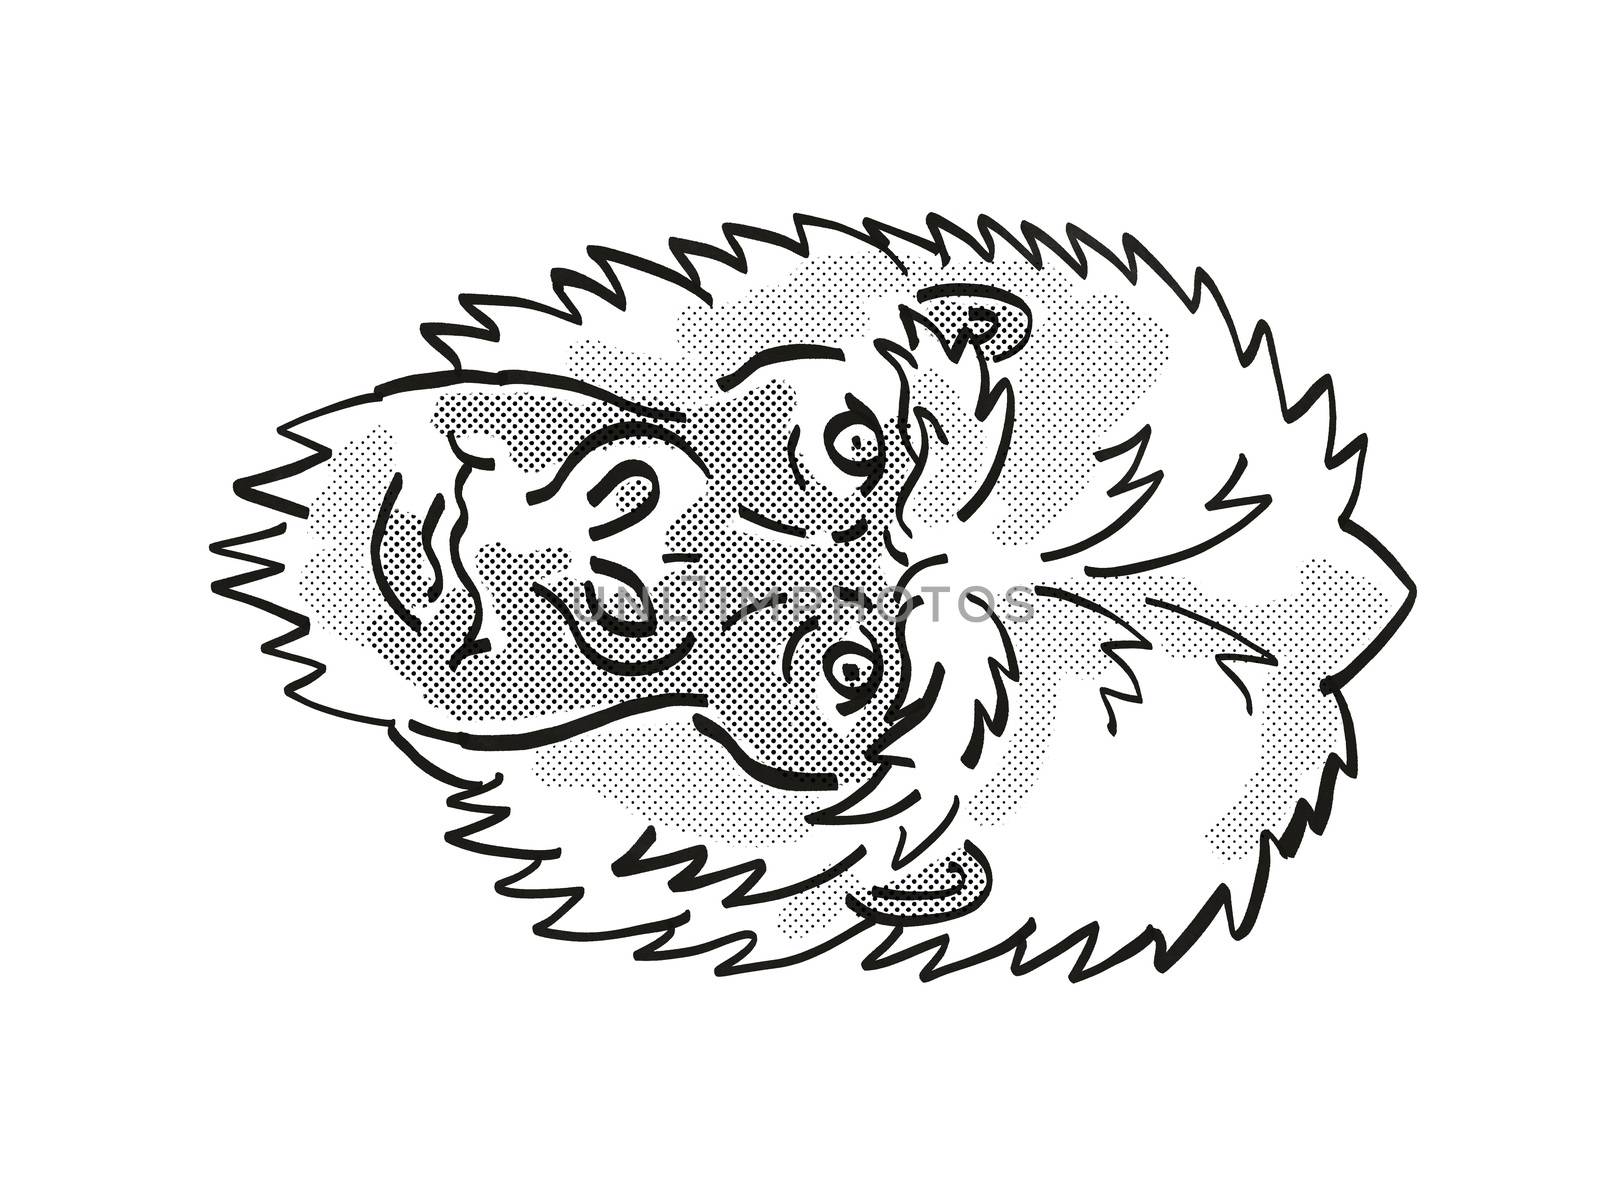 Retro cartoon mono line style drawing of head of an Eastern Gorilla or Gorilla Berengei, an endangered wildlife species on isolated white background done in black and white.